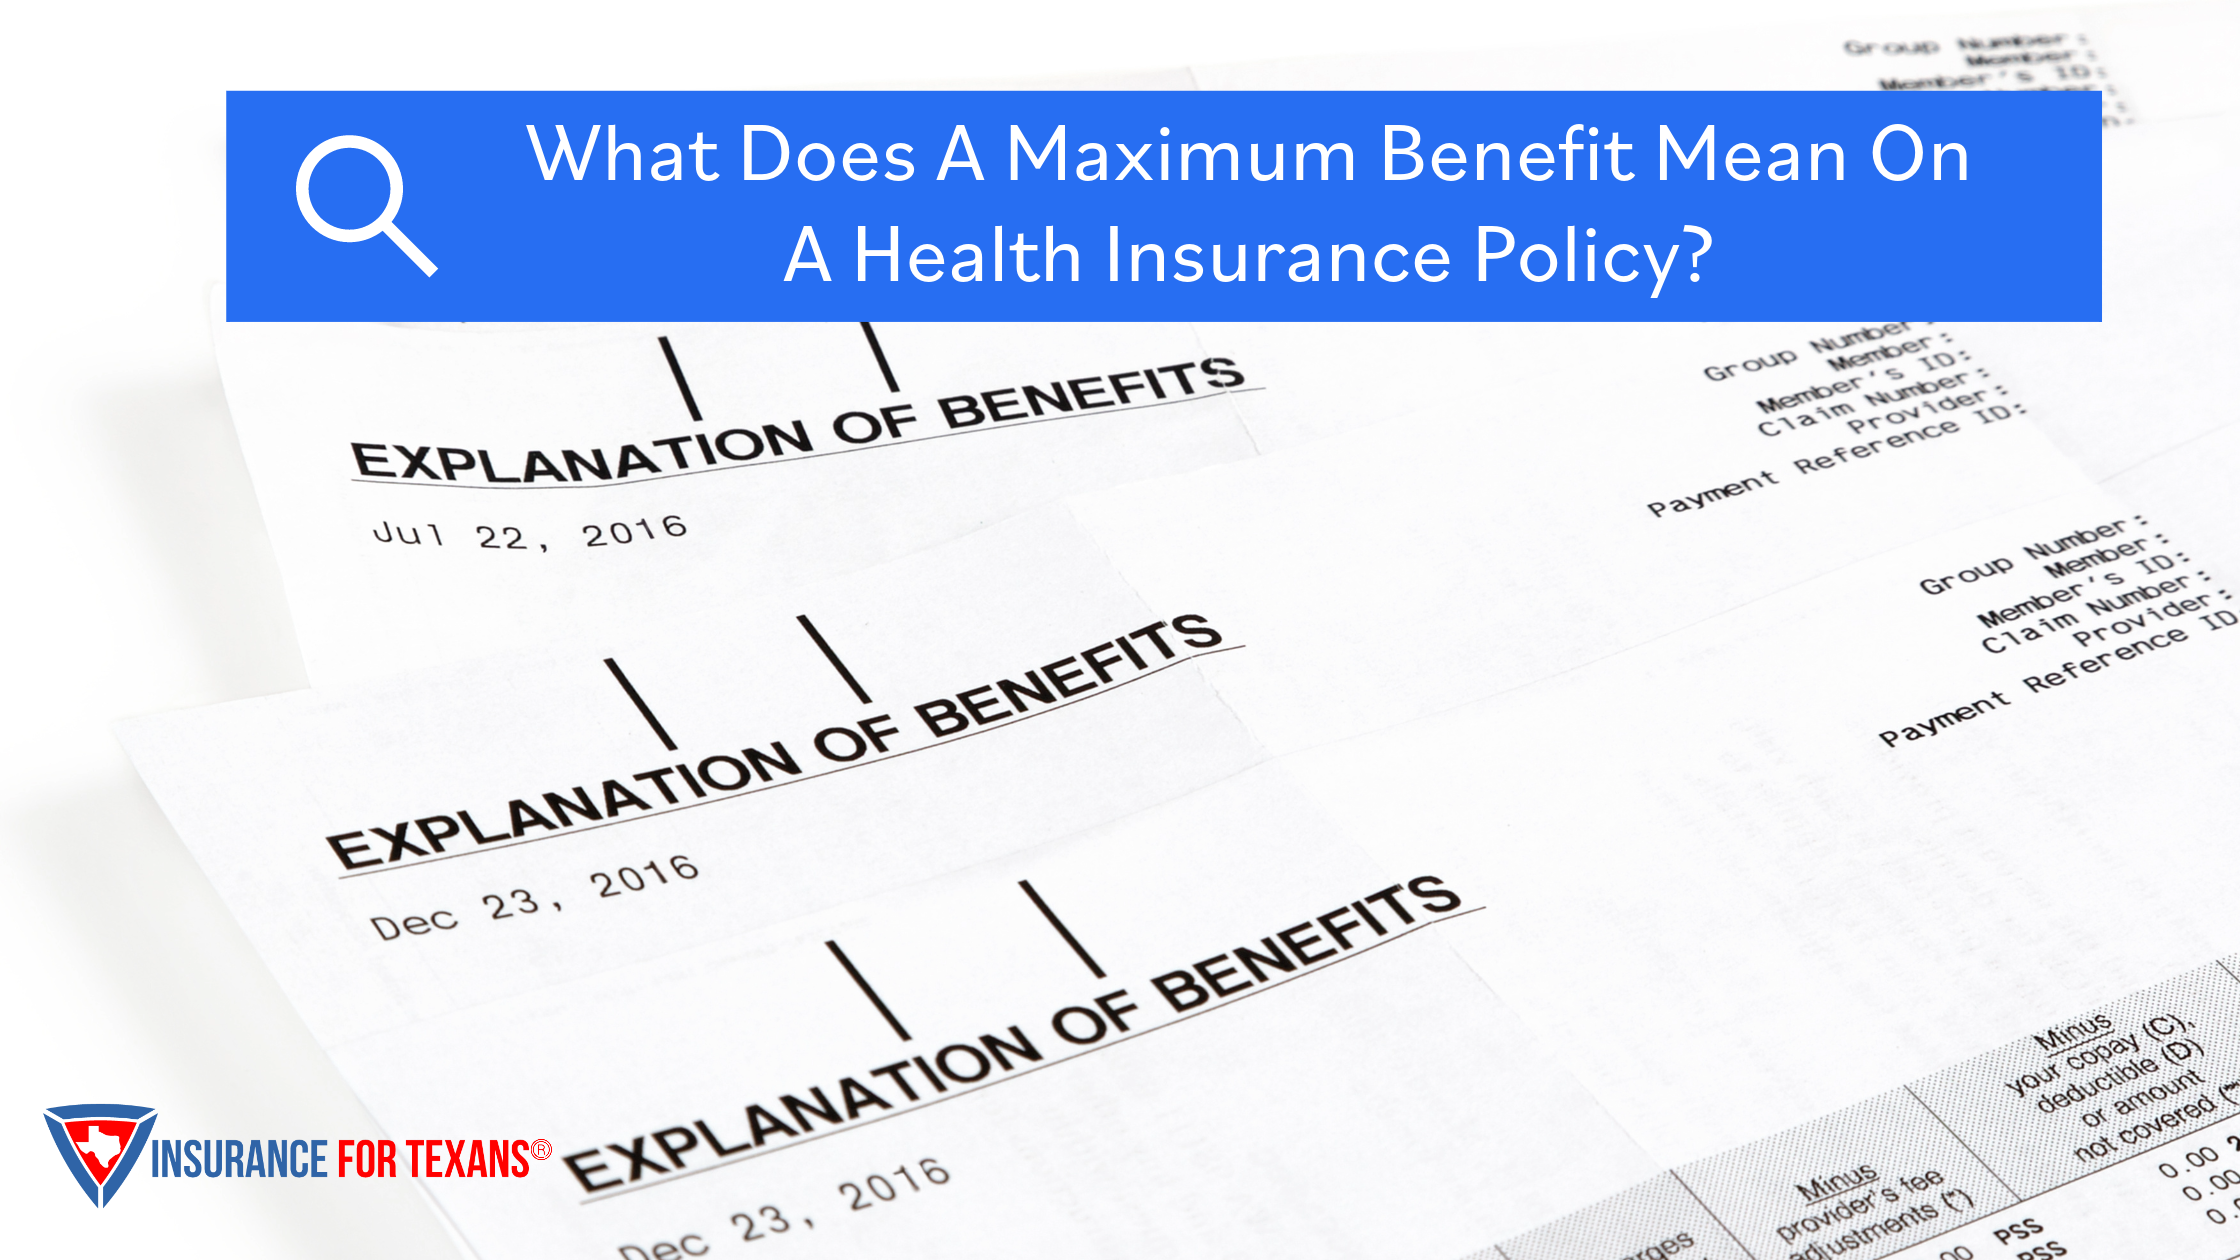 What Does A Maximum Benefit Mean On A Health Insurance Policy?